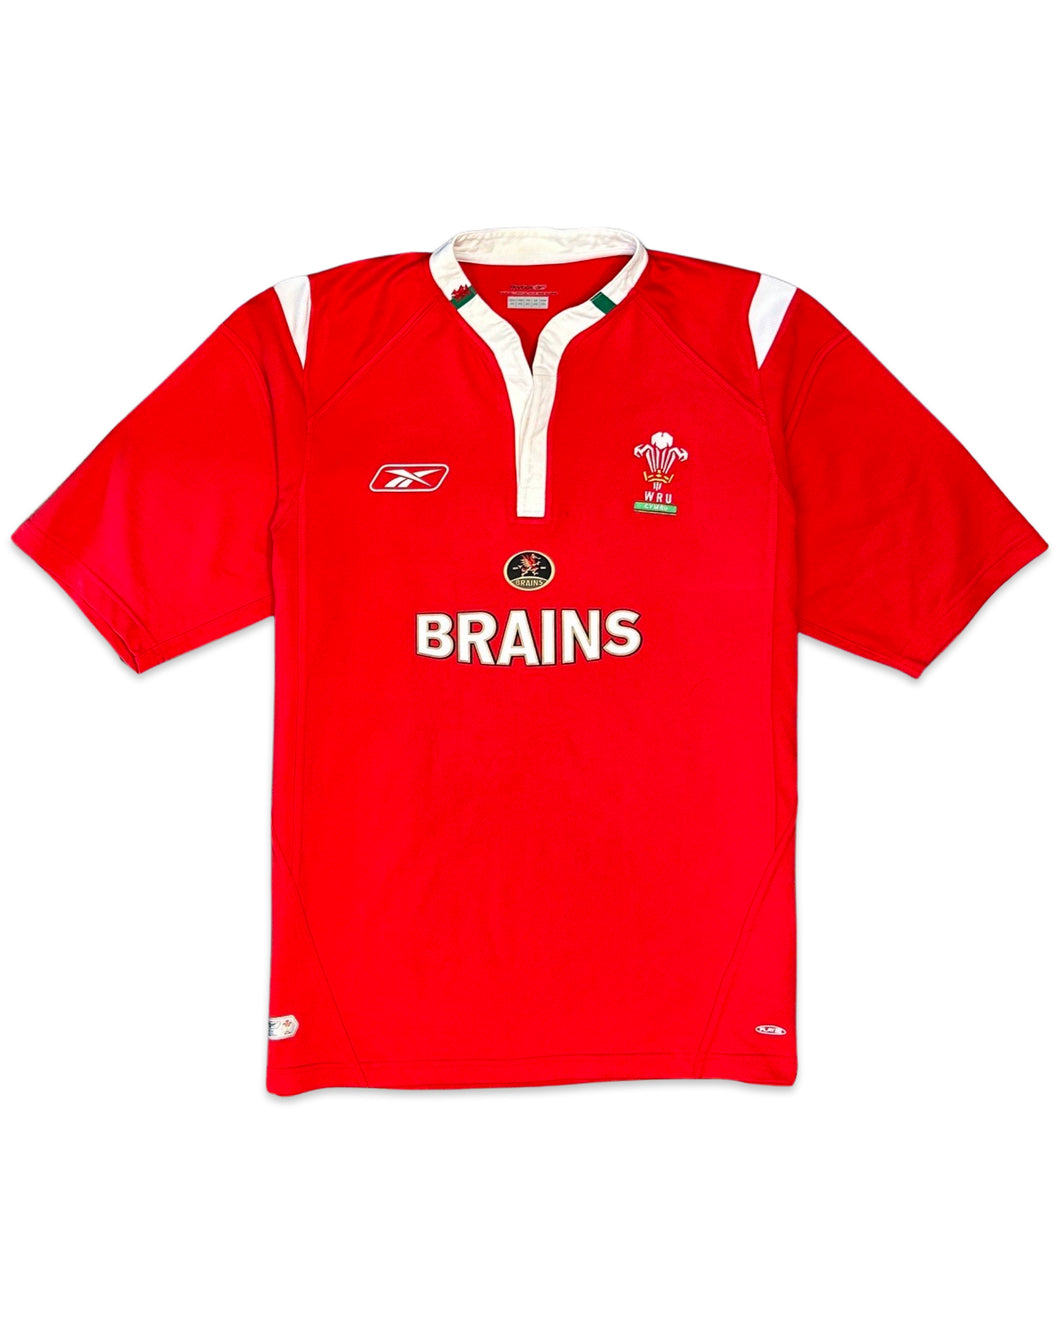 Reebok Vintage 04/05 Wales Rugby Union Home Jersey Short Sleeve ⏐ Fits 2X/3XL